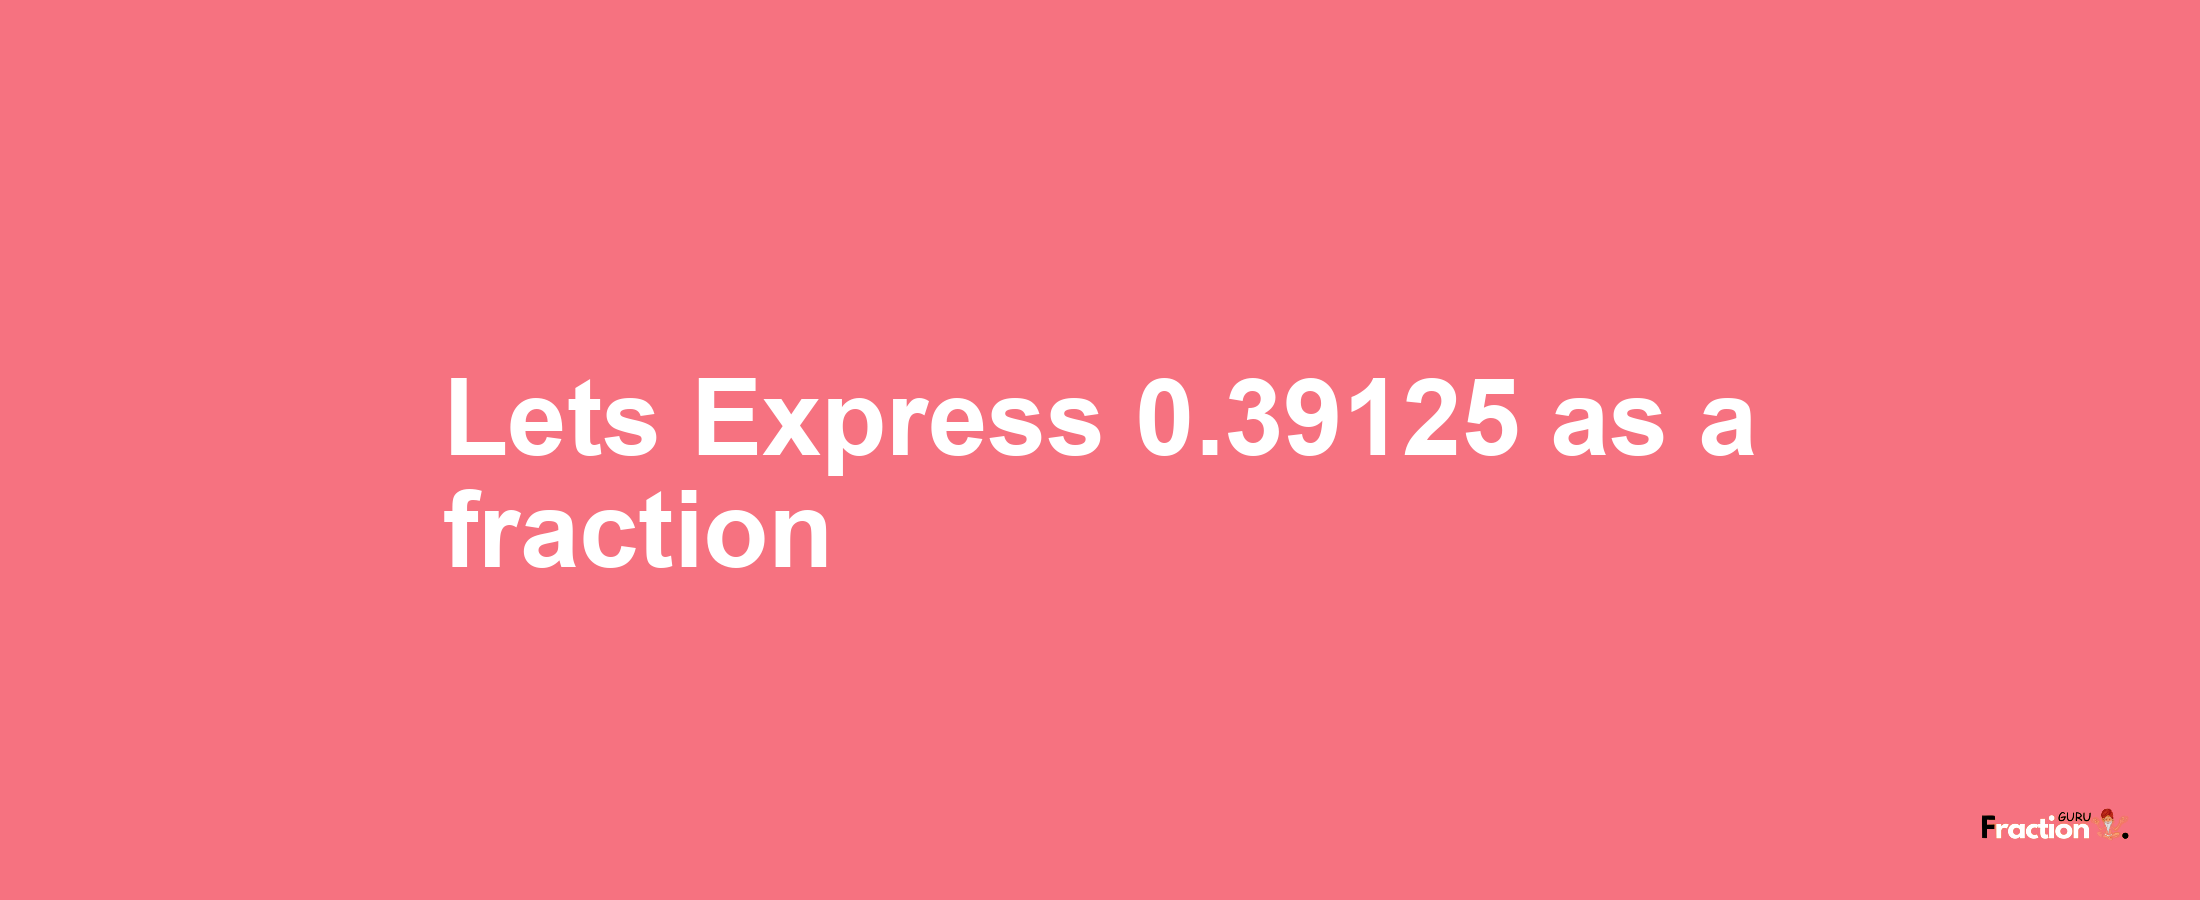 Lets Express 0.39125 as afraction